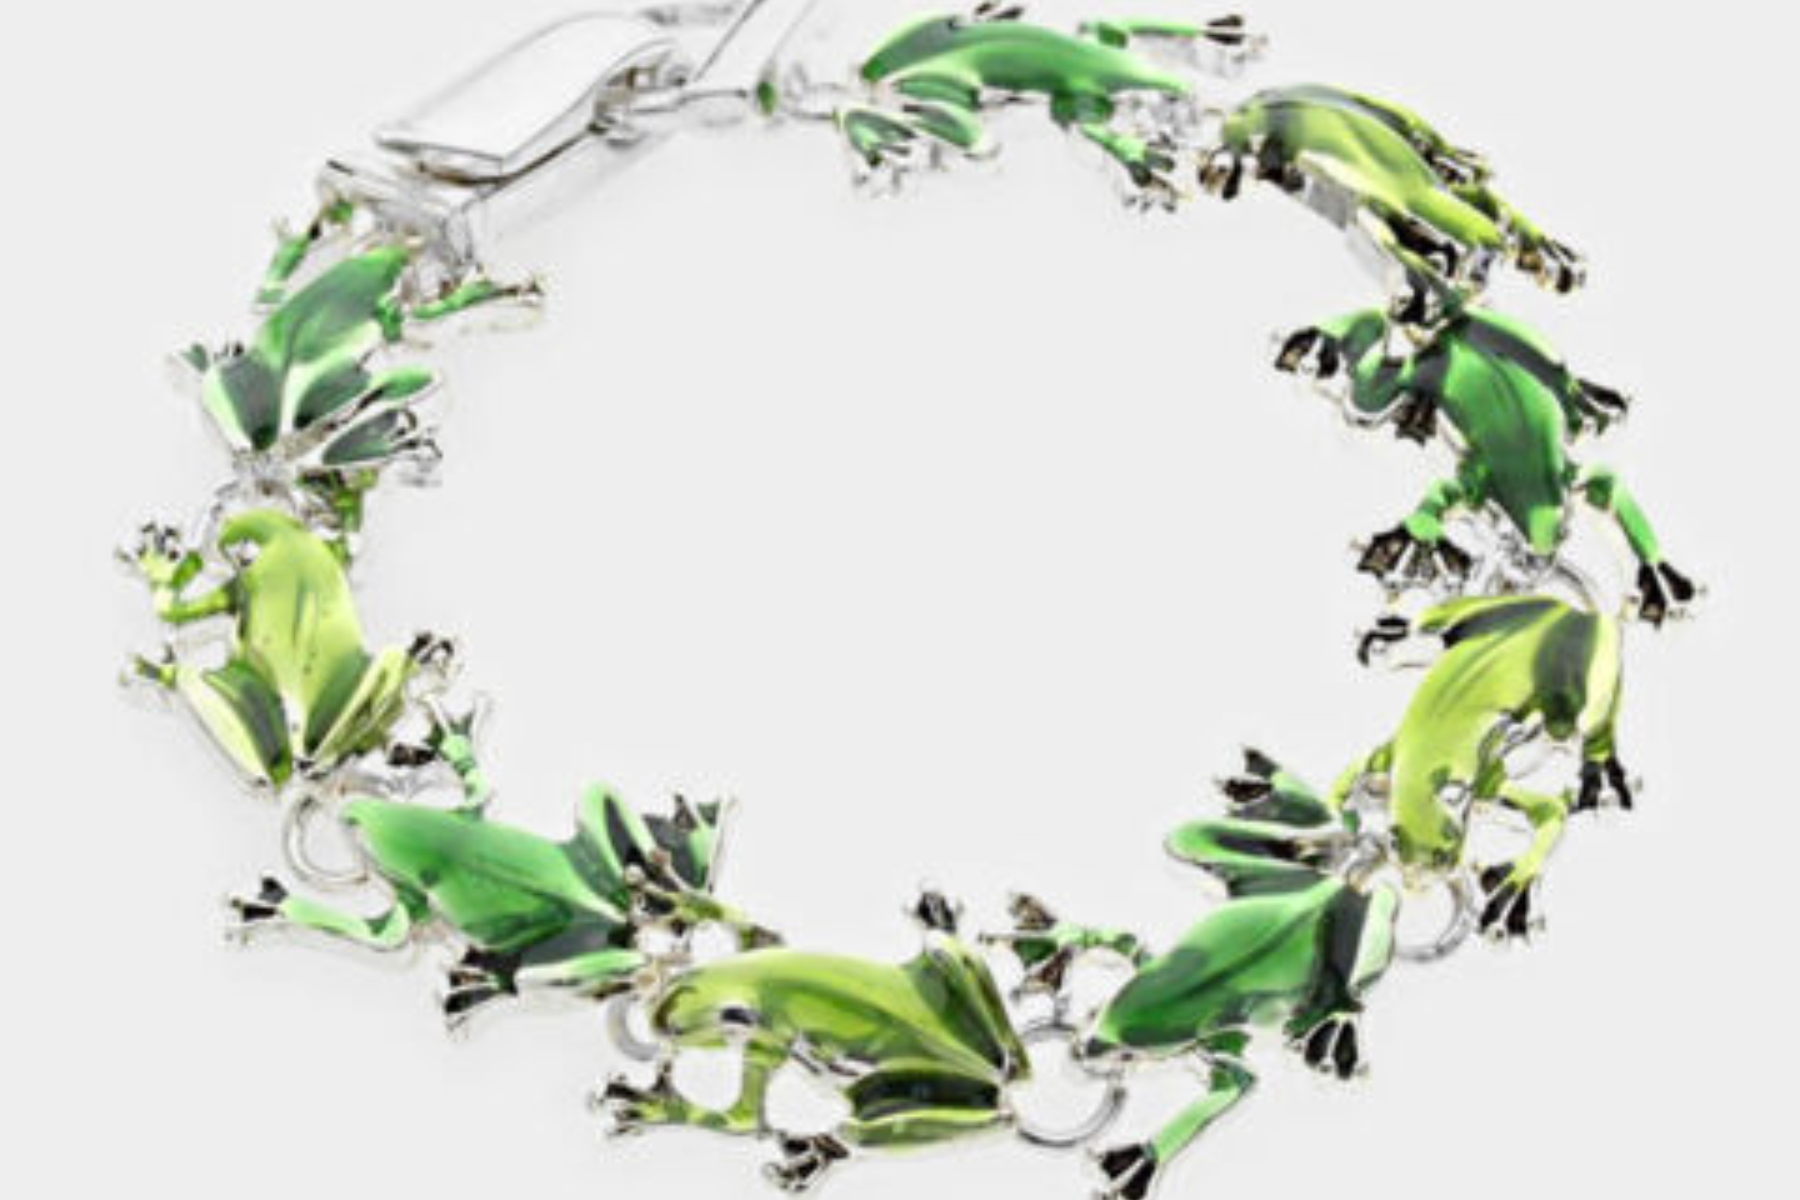 A bracelet with a design of green frogs